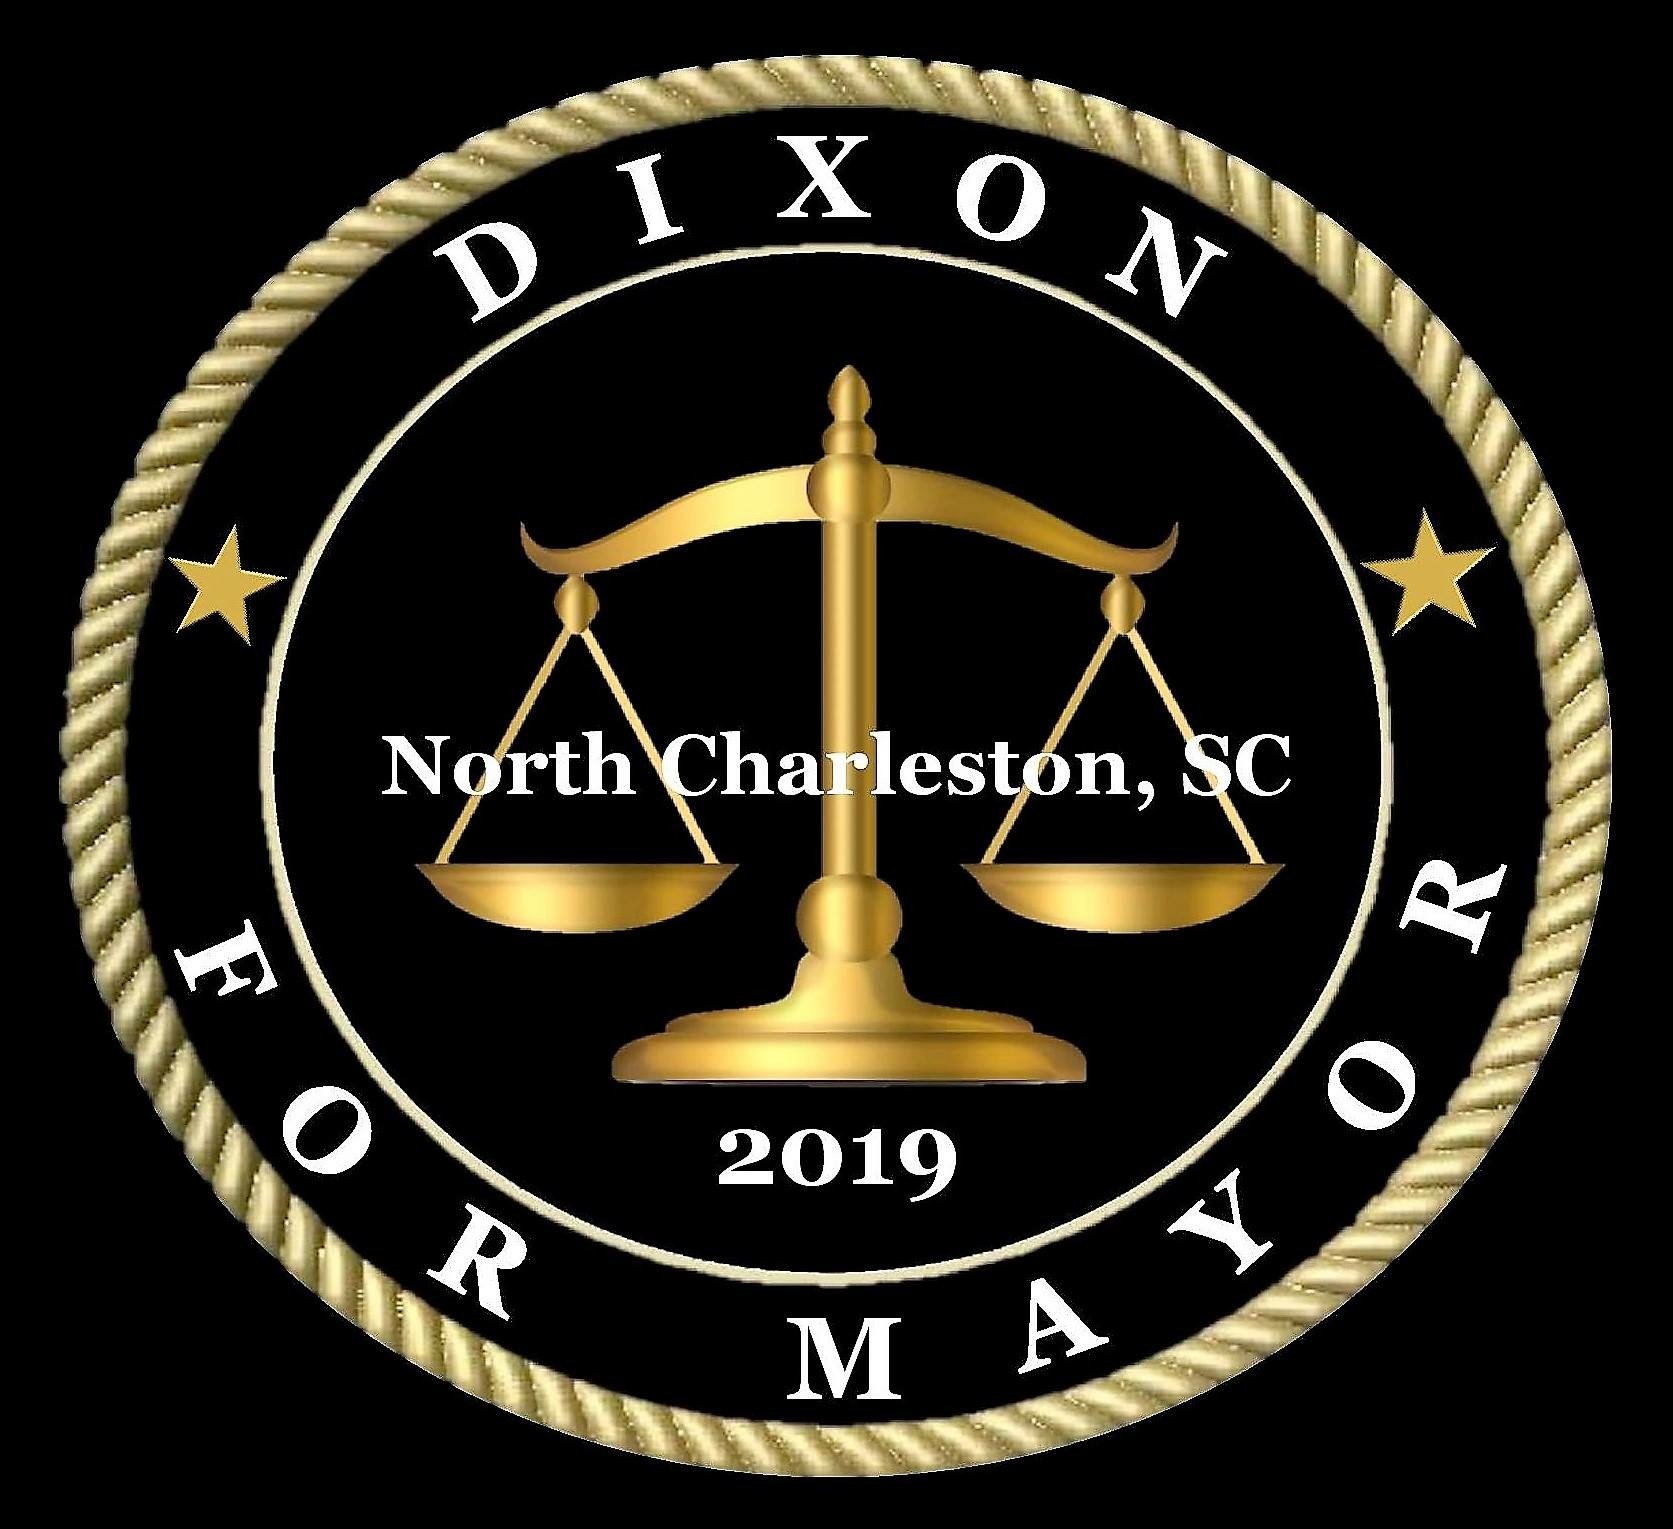 Social justice advocate Pastor Thomas Dixon is running for mayor of North Charleston in 2019. Support #DixonForMayor. It's time to put #PeopleFirst.